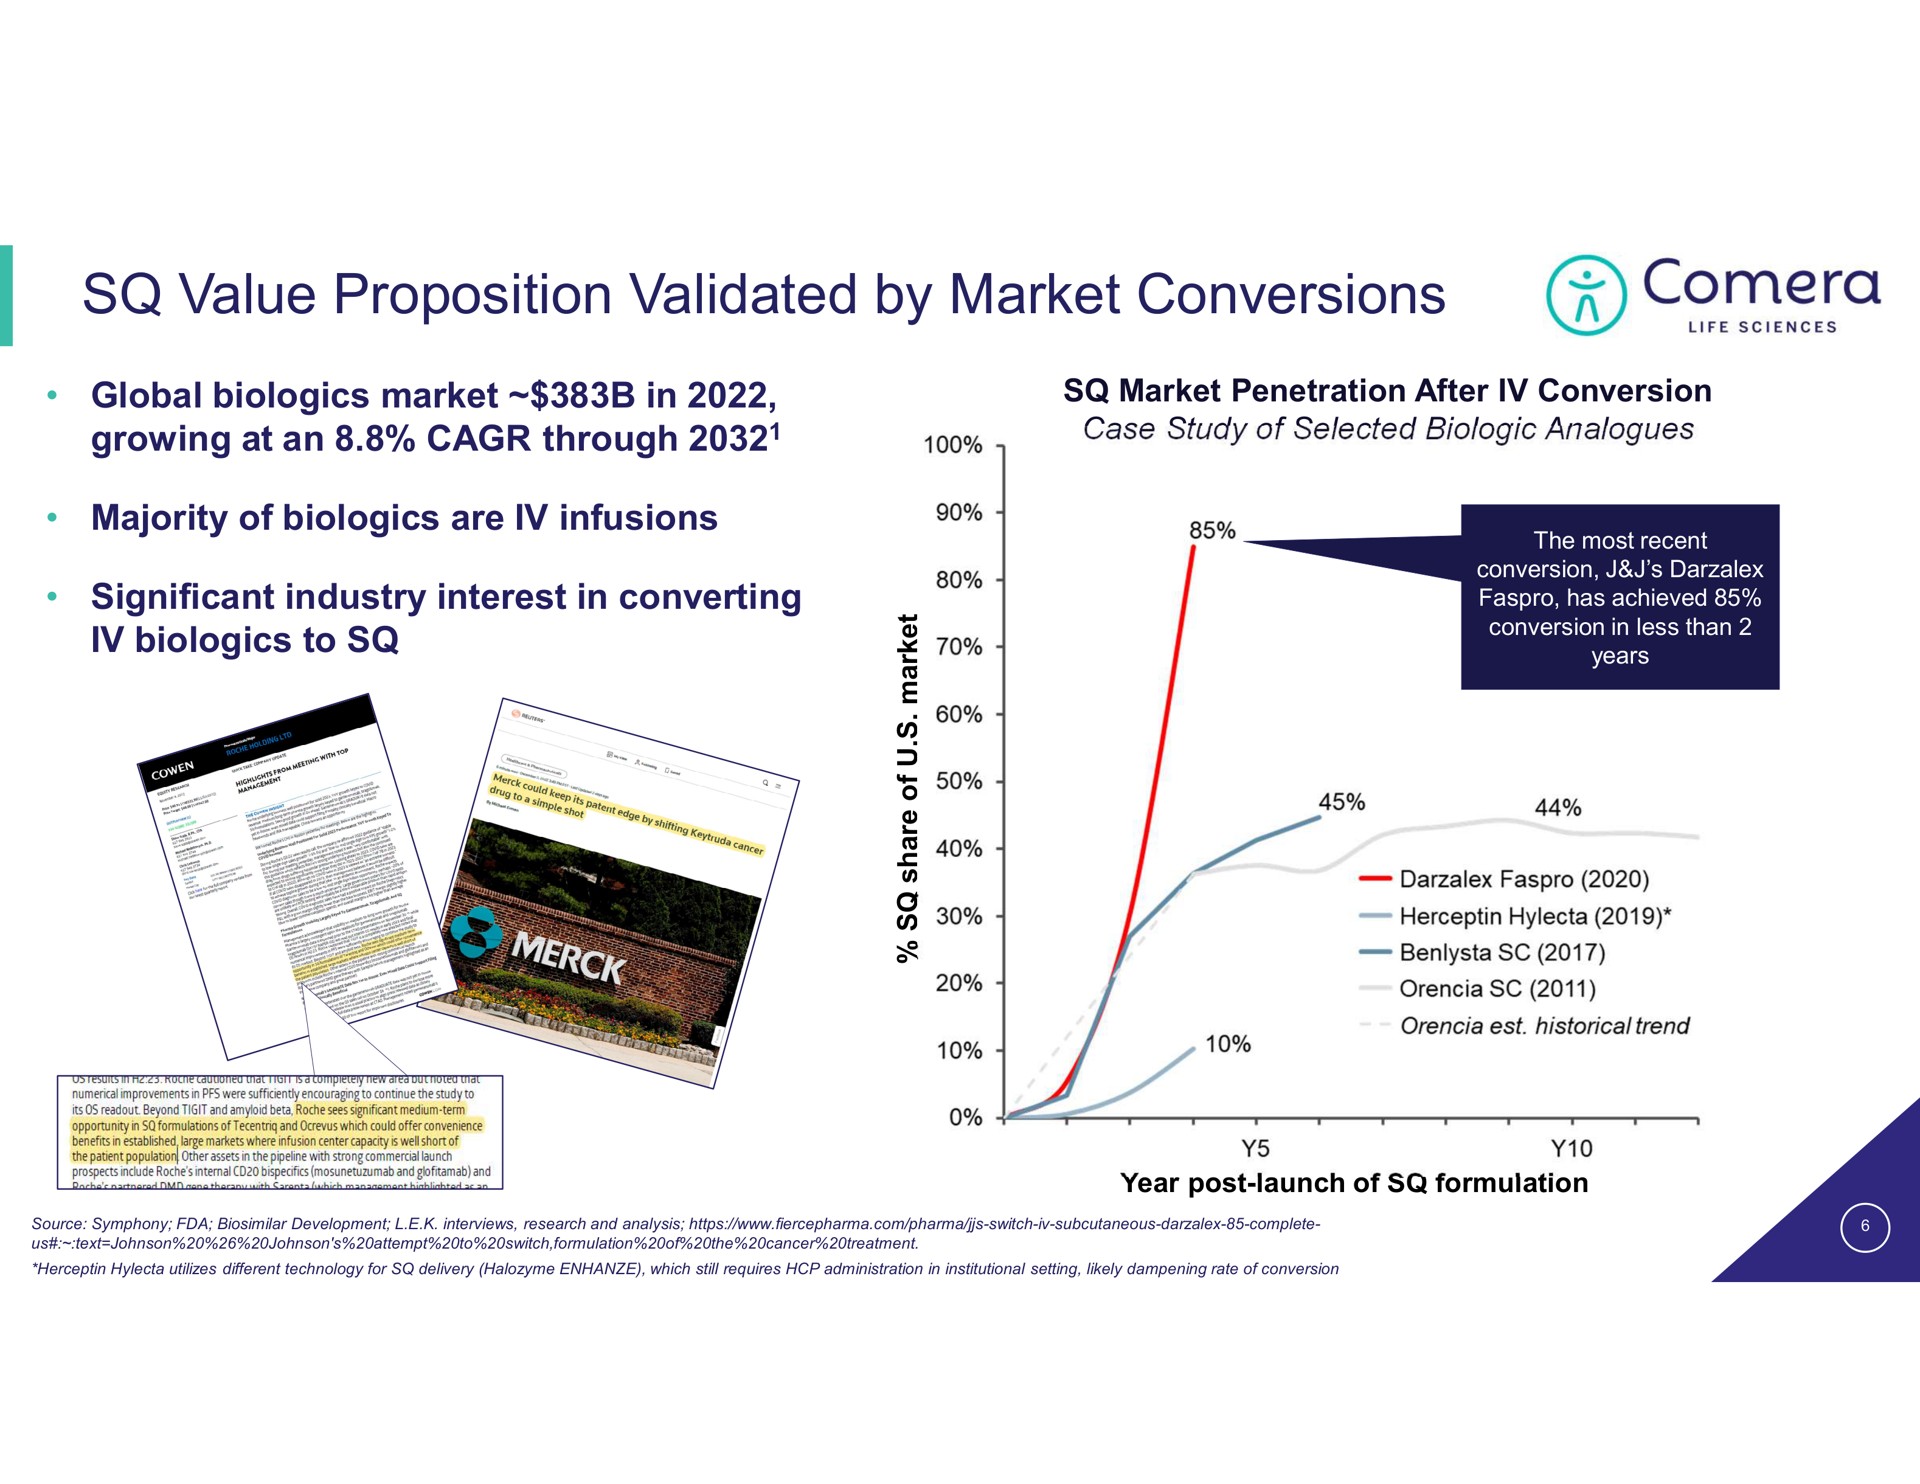 value proposition validated by market conversions | Comera